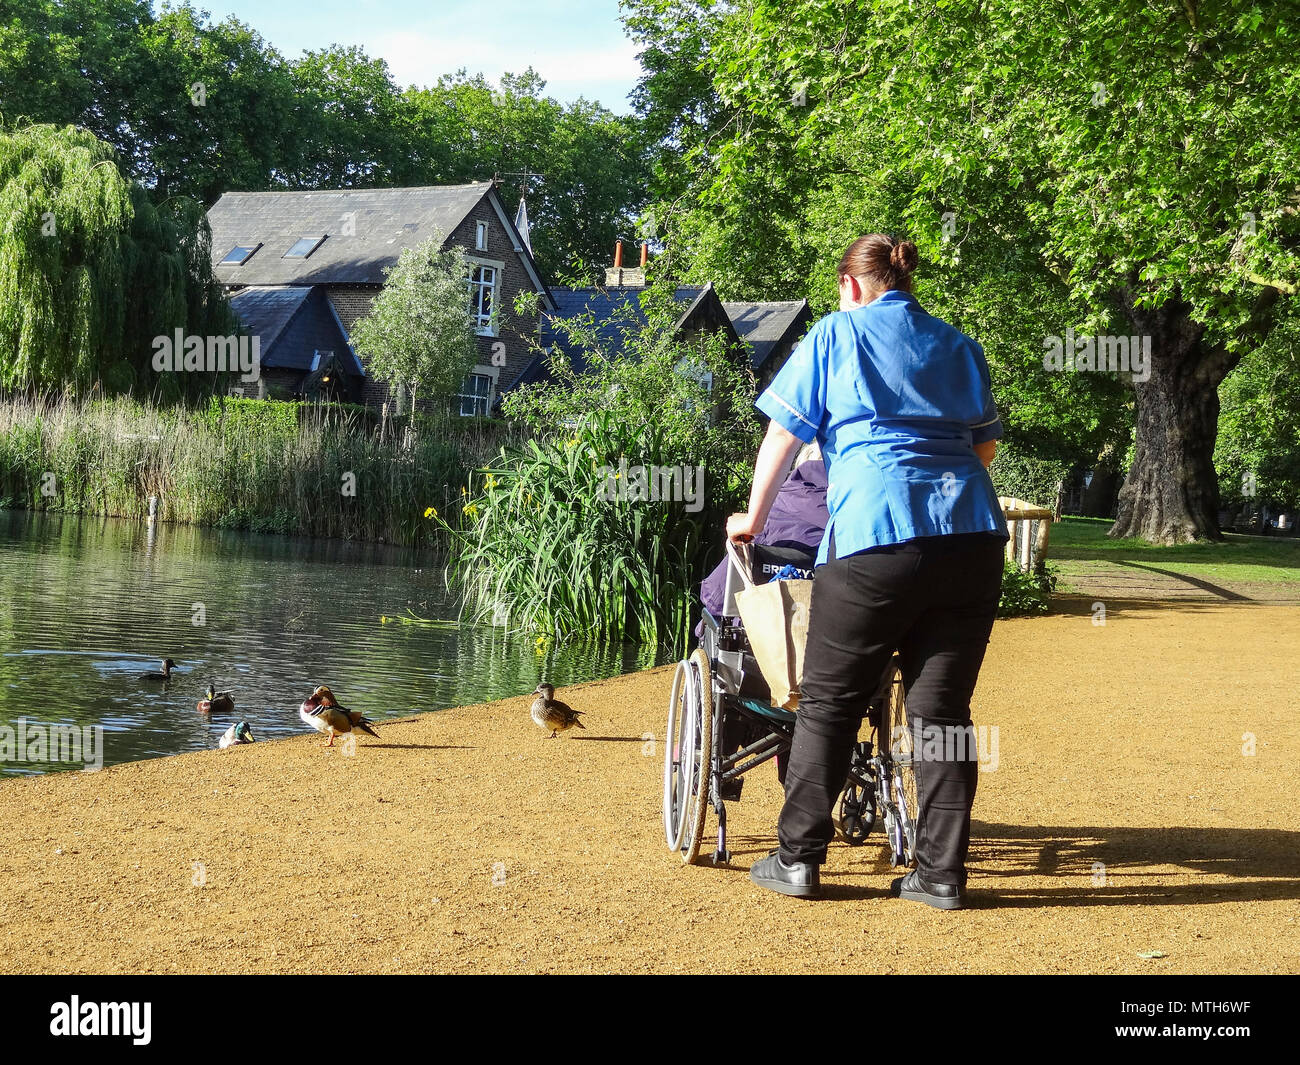 Healthcare in the community - a community nurse and wheelchair-bound patient viewing a restful Barnes Pond, London, SW13, England, U.K. Stock Photo